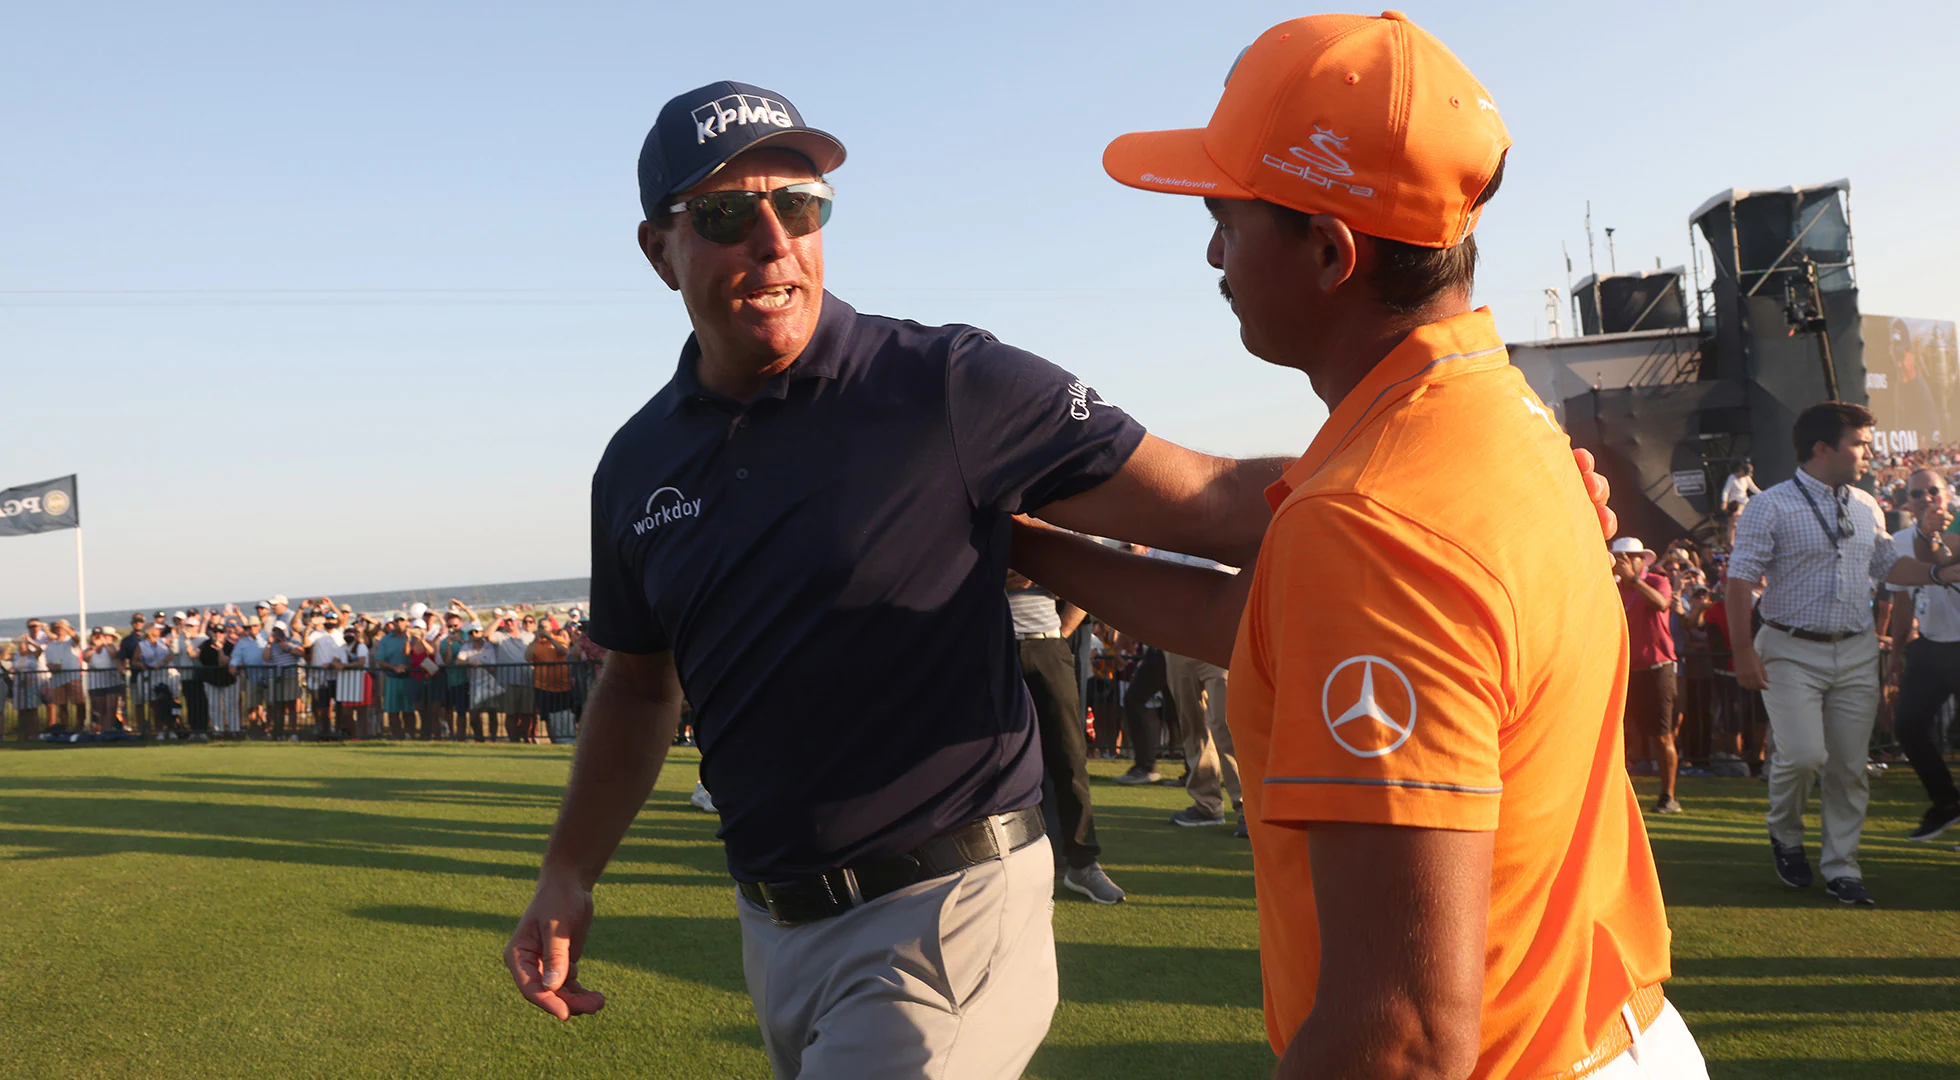 Phil Mickelson tweets idea to get Rickie Fowler in next week’s U.S. Open after not qualifying